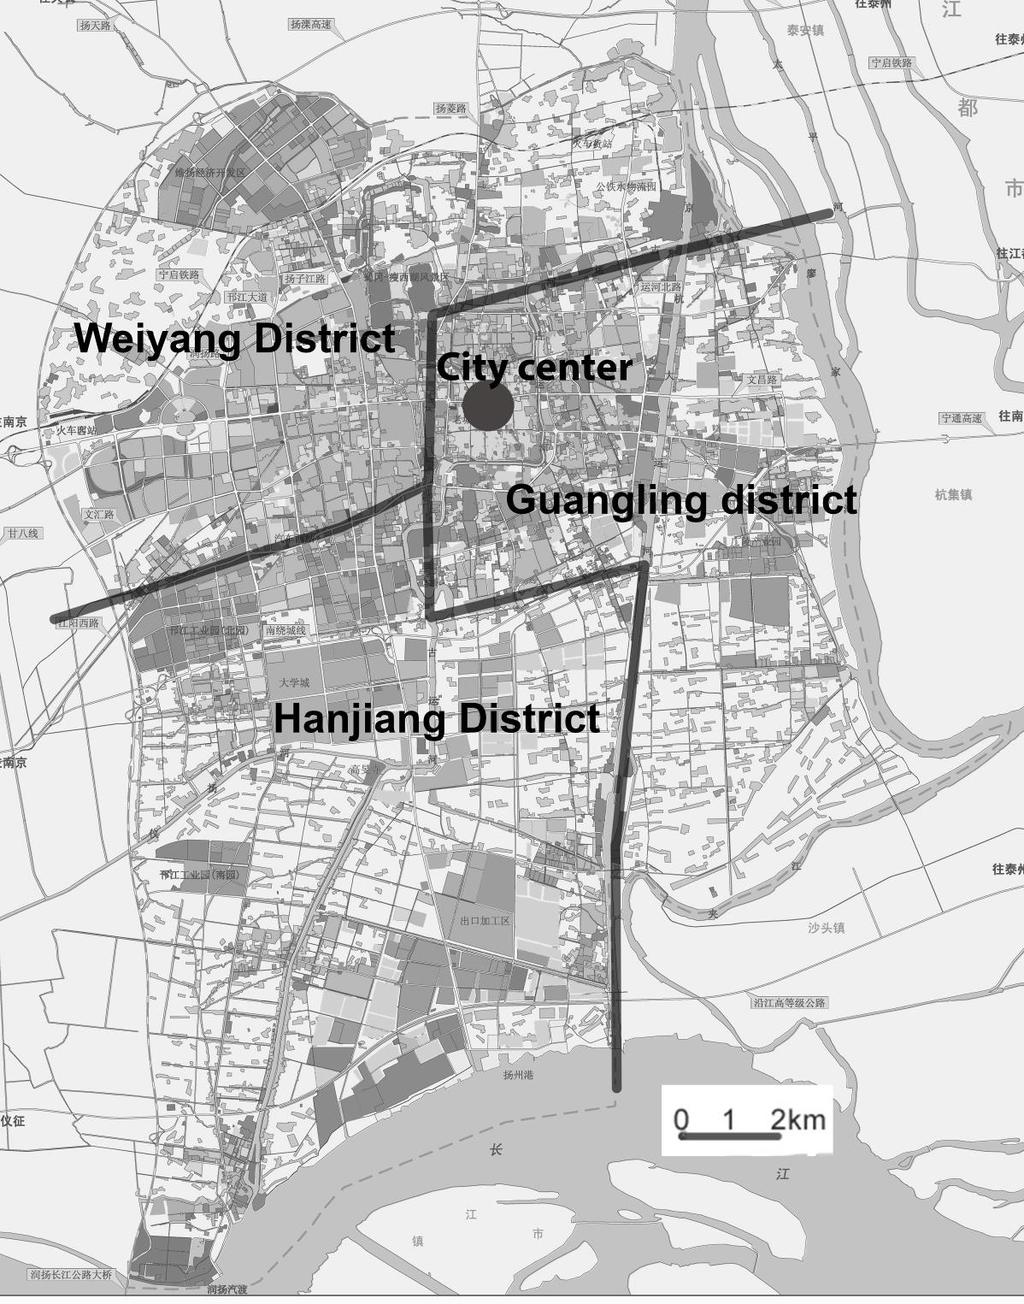 Figure 5.2 Three districts in Yangzhou city The researchers handed out 973 questionnaires and collected 739 answers (a response rate of 76%). In total, 673 respondents answered all of the questions.